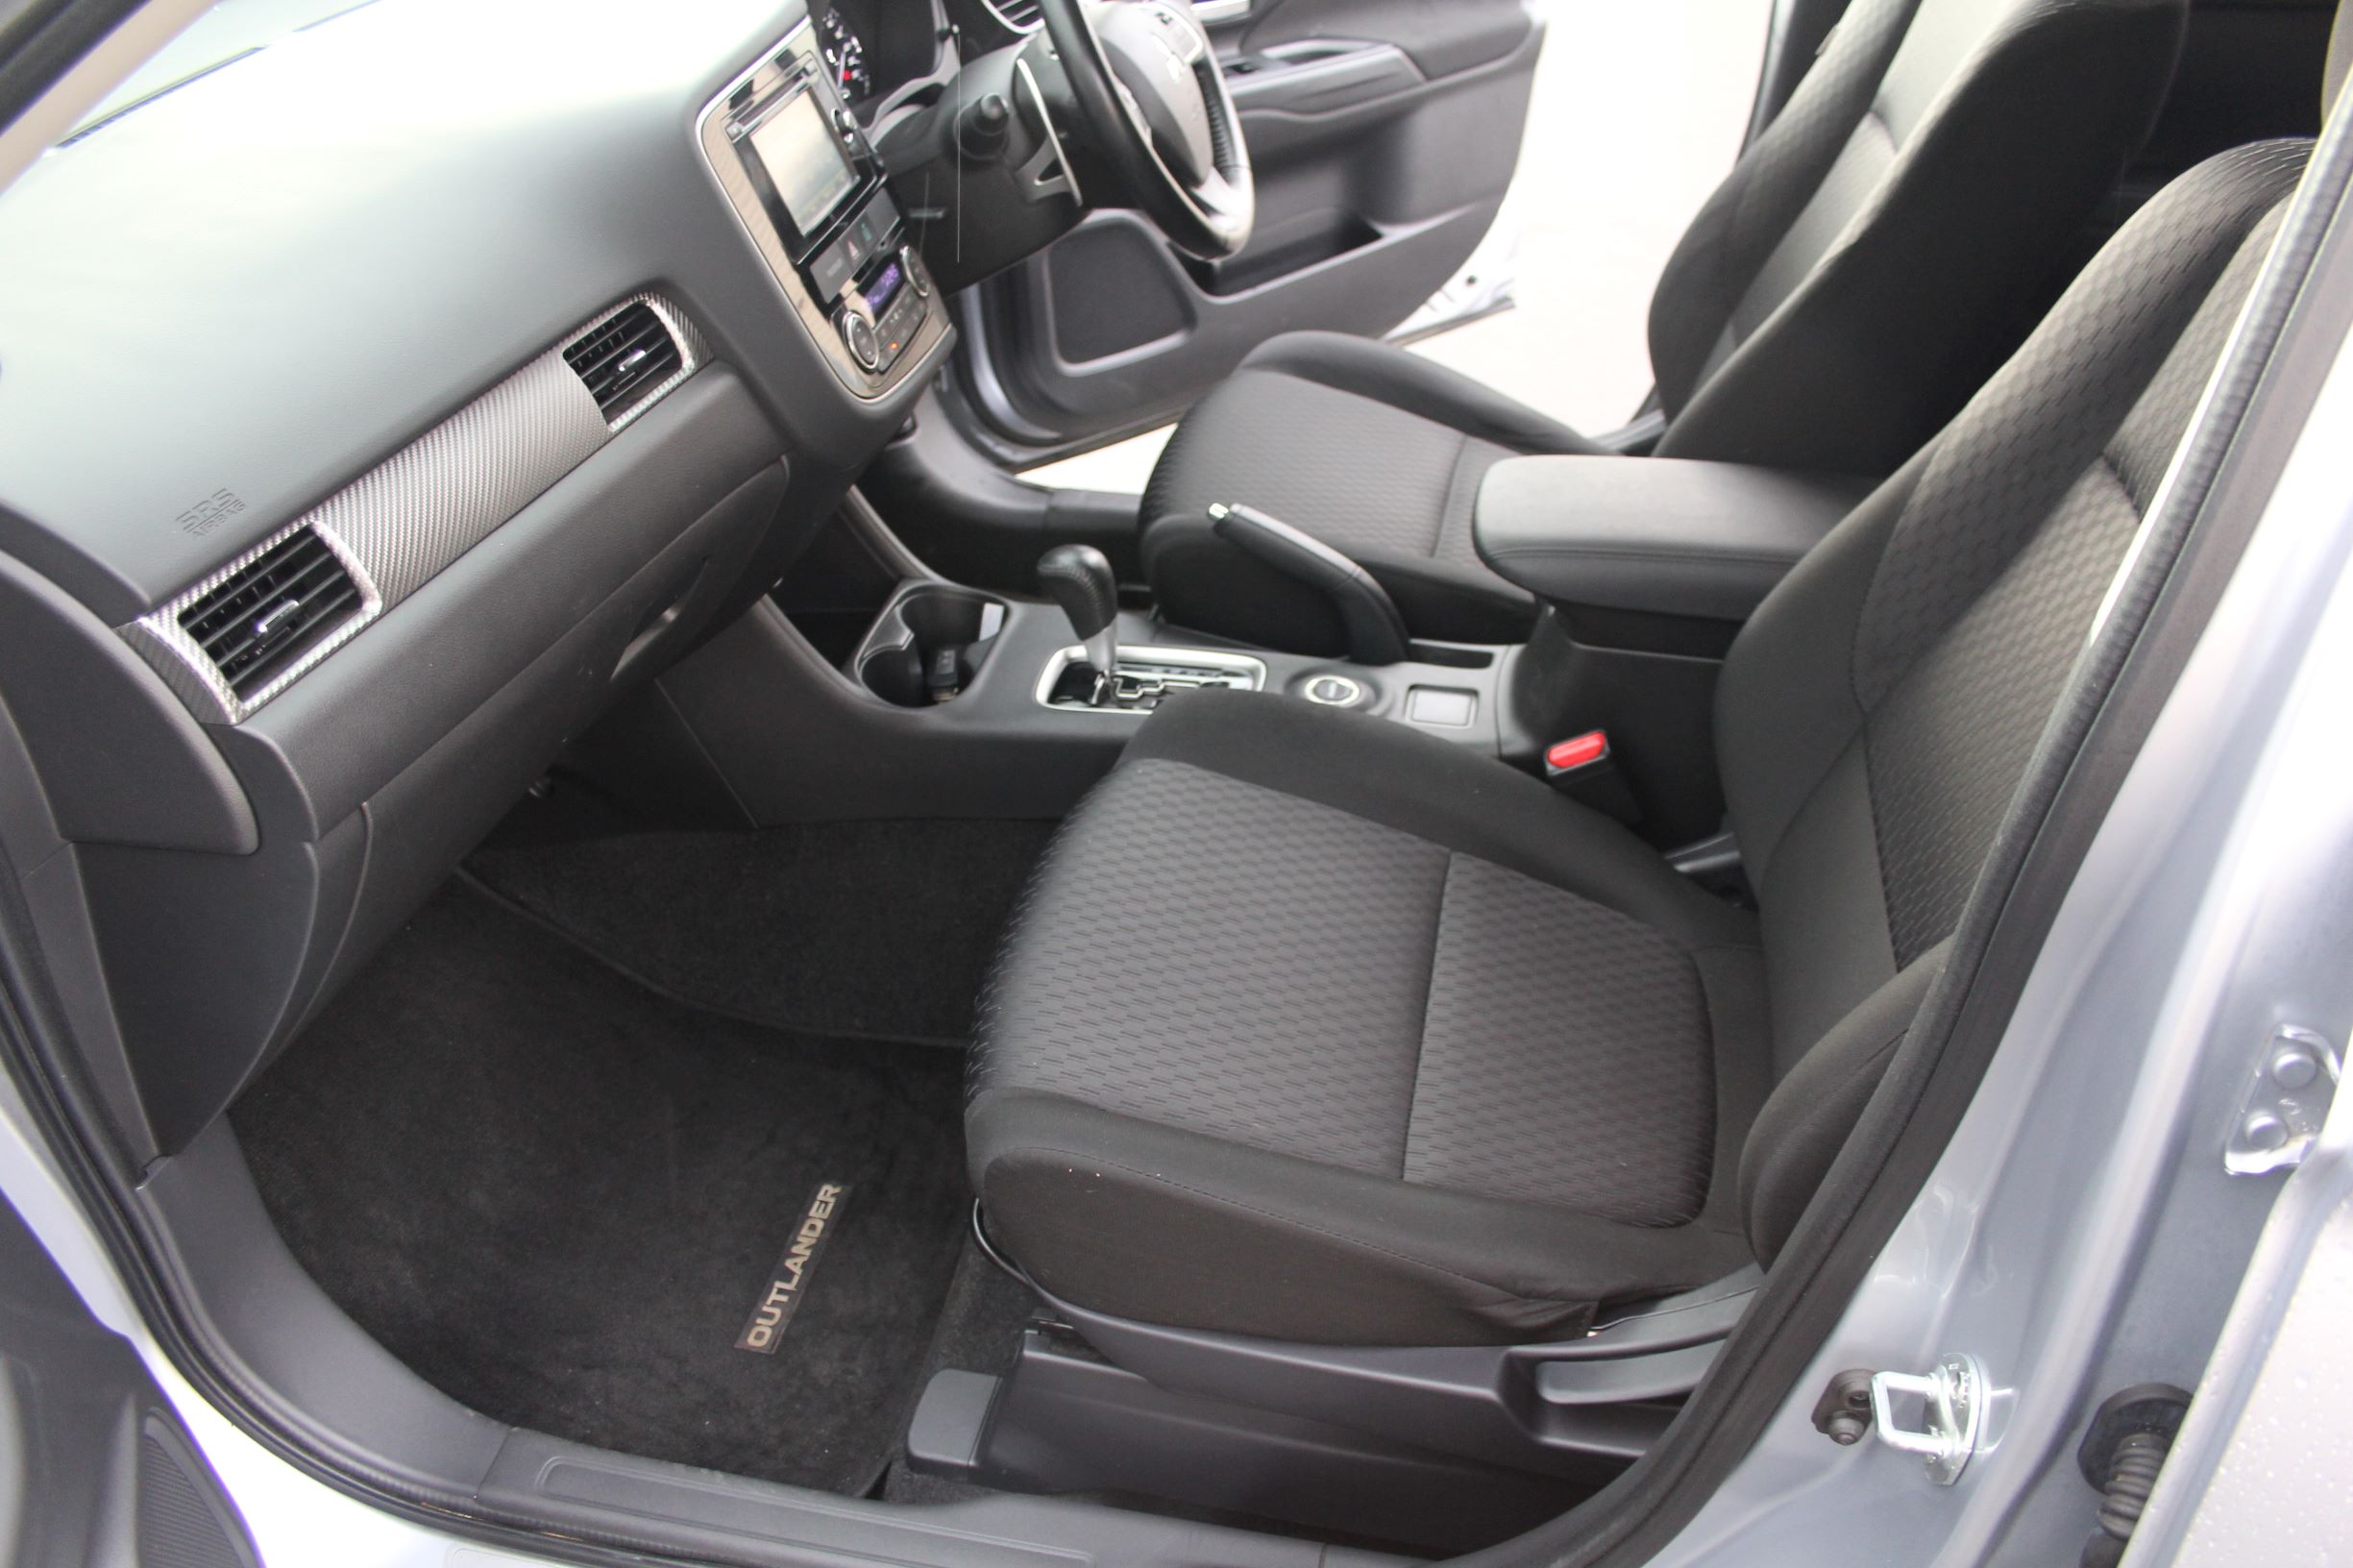 Mitsubishi OUTLANDER 4WD XLS 2013 for sale in Auckland